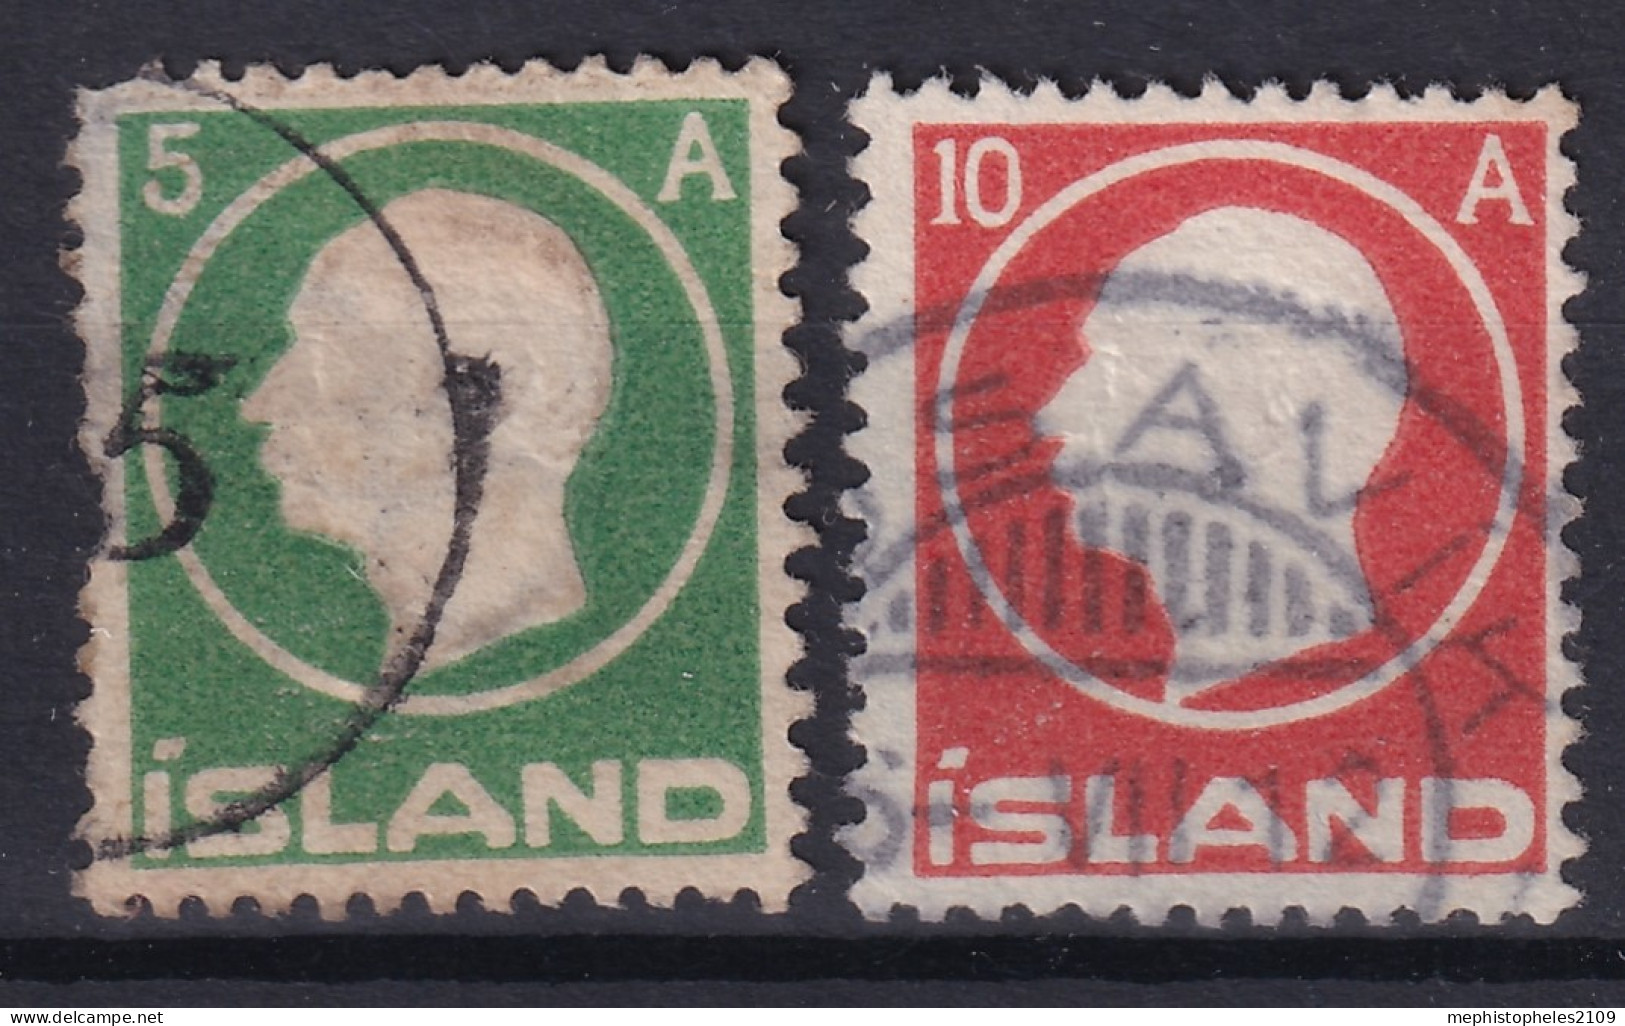 ICELAND 1912 - Canceled - Sc# 92, 93 - Used Stamps